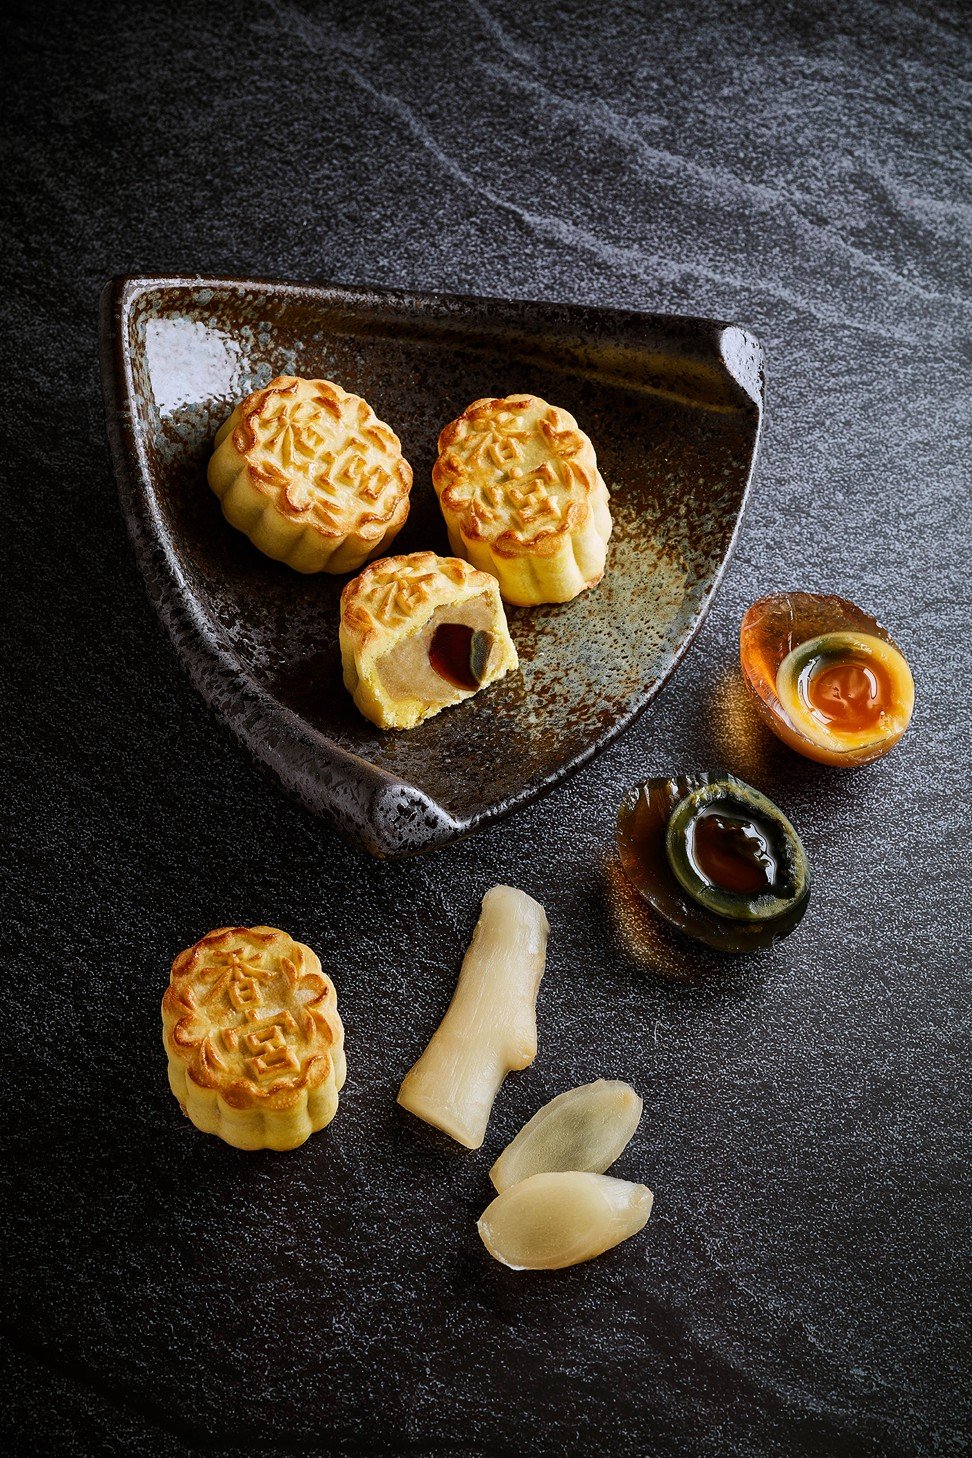 Kowloon Shangri-La make mini mooncakes with traditional and “golden” preserved eggs. The golden eggs have a more attractive golden albumen, an orange yolk and milder taste.